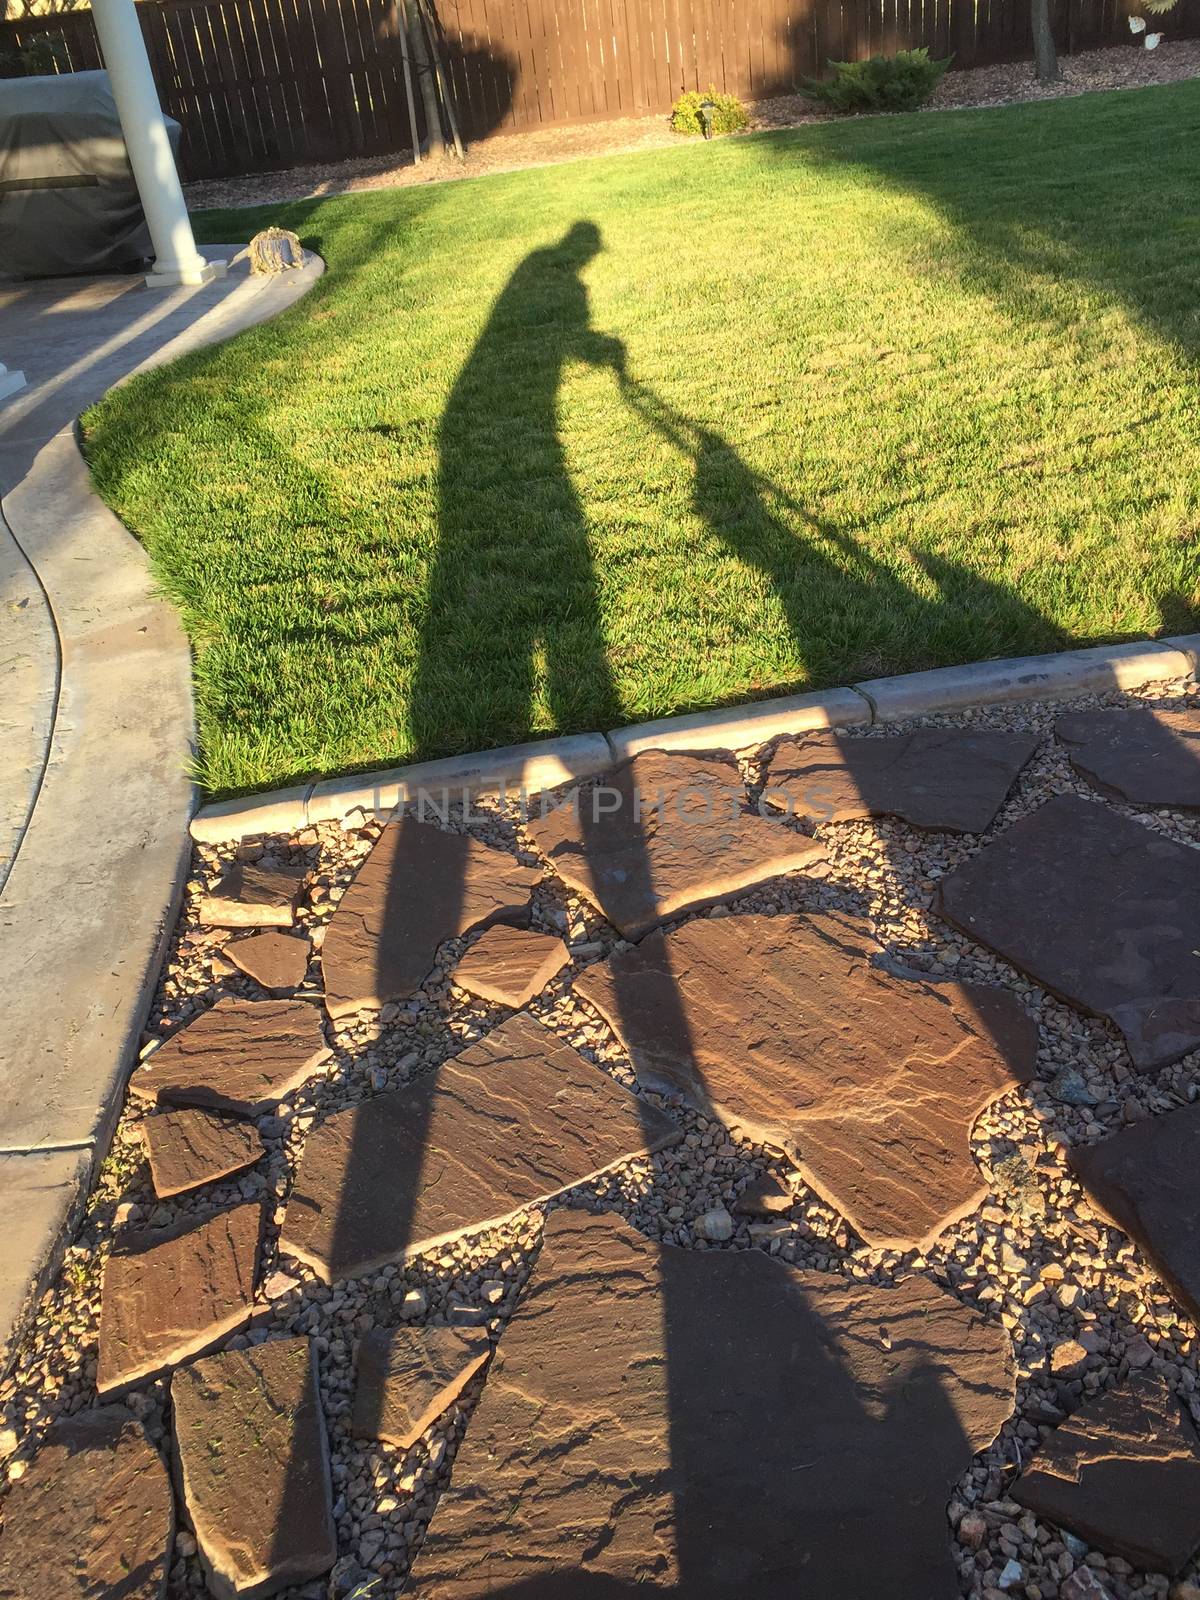 Shadow of Man Pushing Lawn Mower Over Grass.